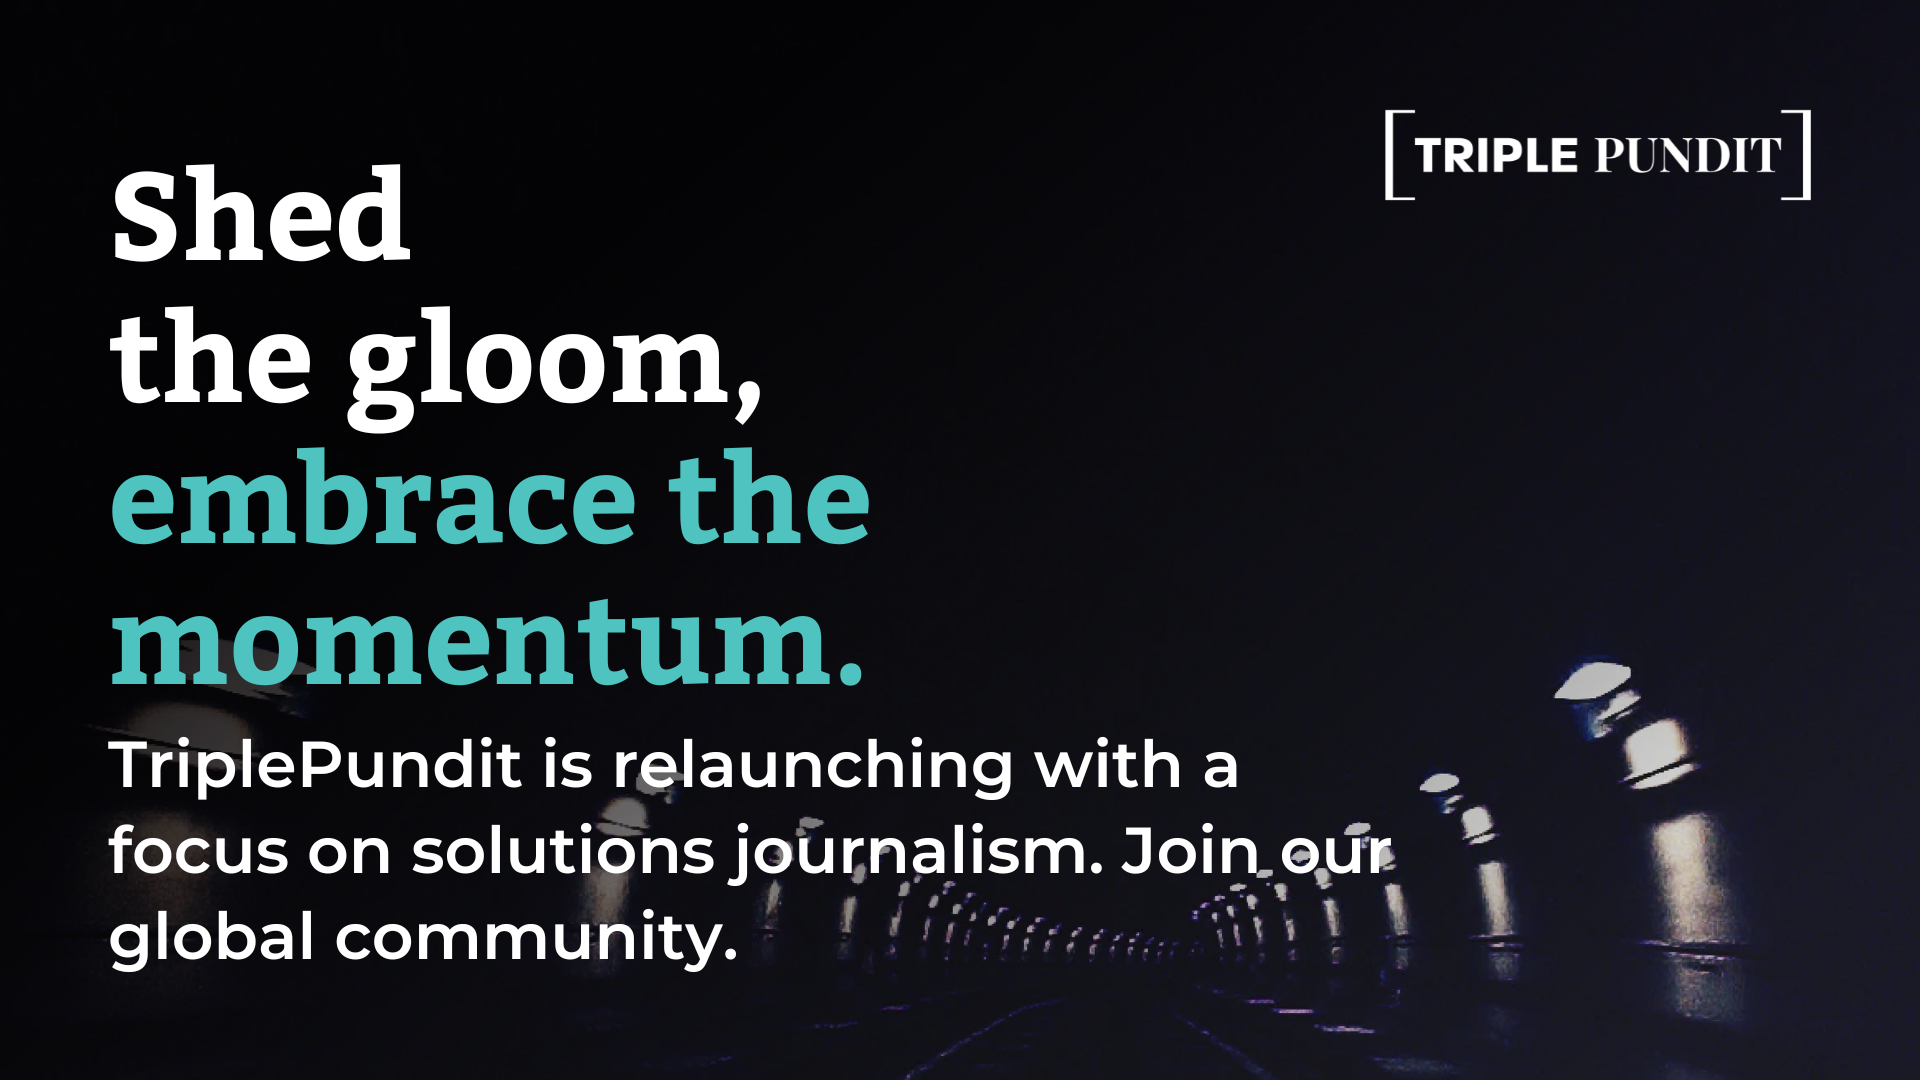 Shed the gloom, embrace the momentum. TriplePundit is relaunching with a focus on solutions journalism. Join our global community.